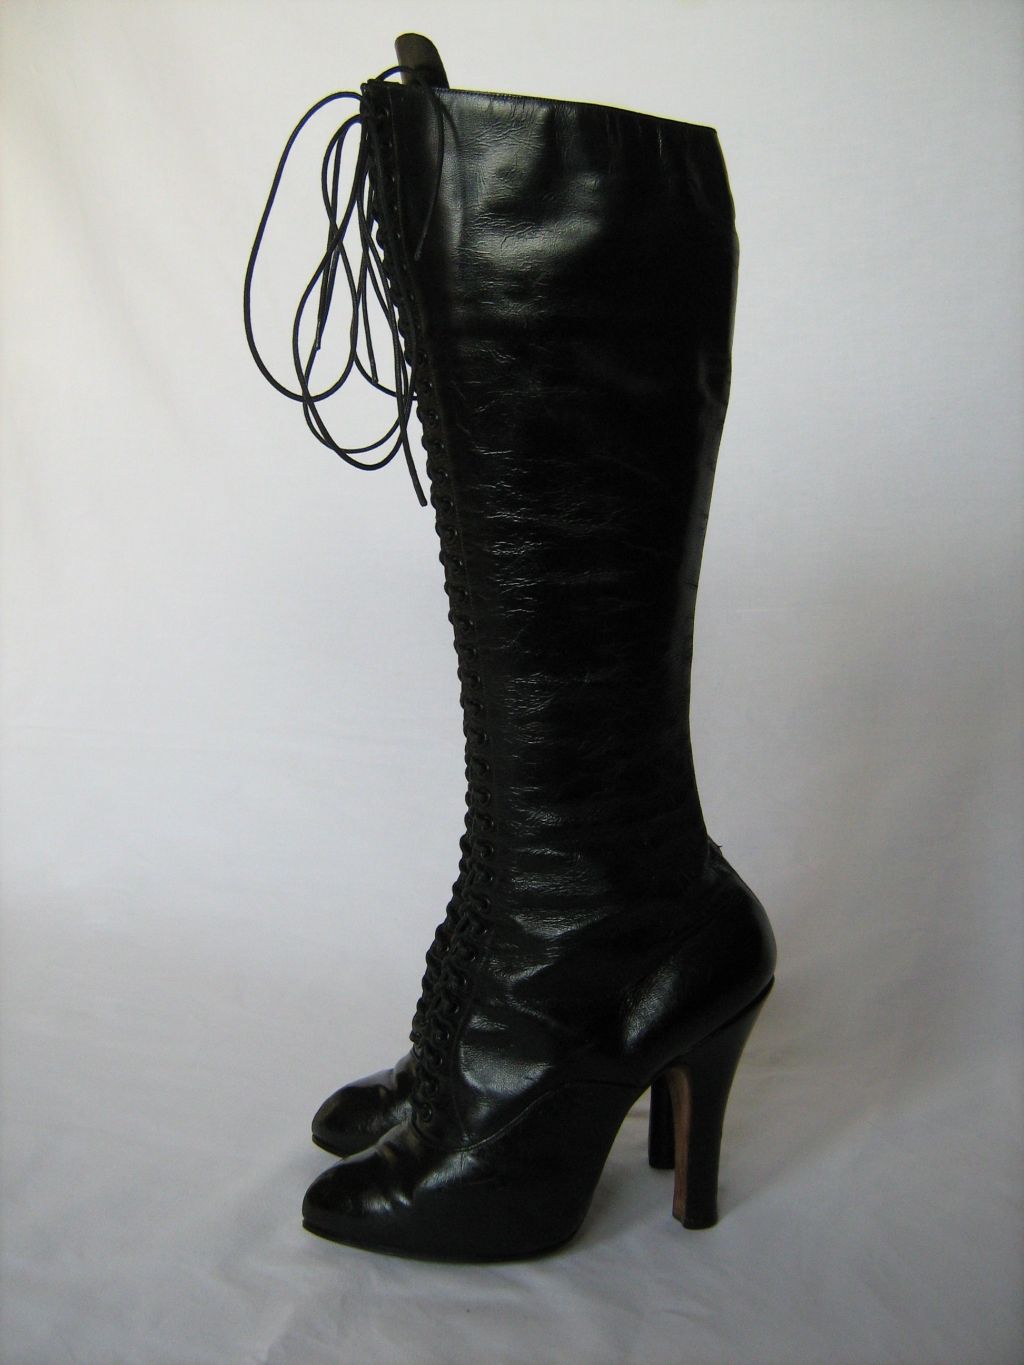 Boots of the 30s - Vintage fashions - High Heel Place